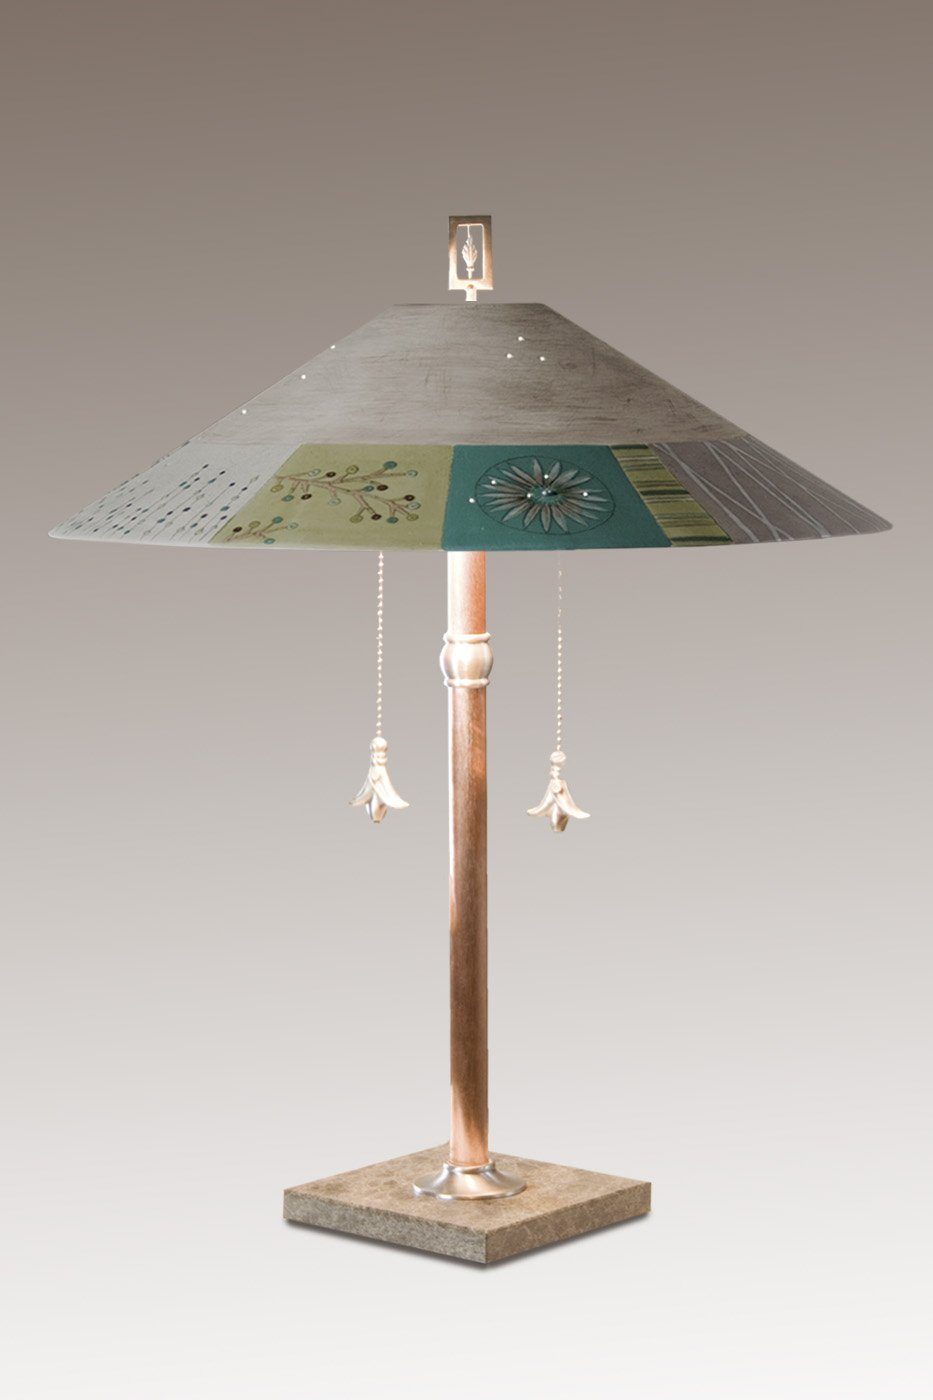 Janna Ugone & Co Table Lamps Copper Table Lamp with Large Wide Conical Ceramic Shade in Modern Field